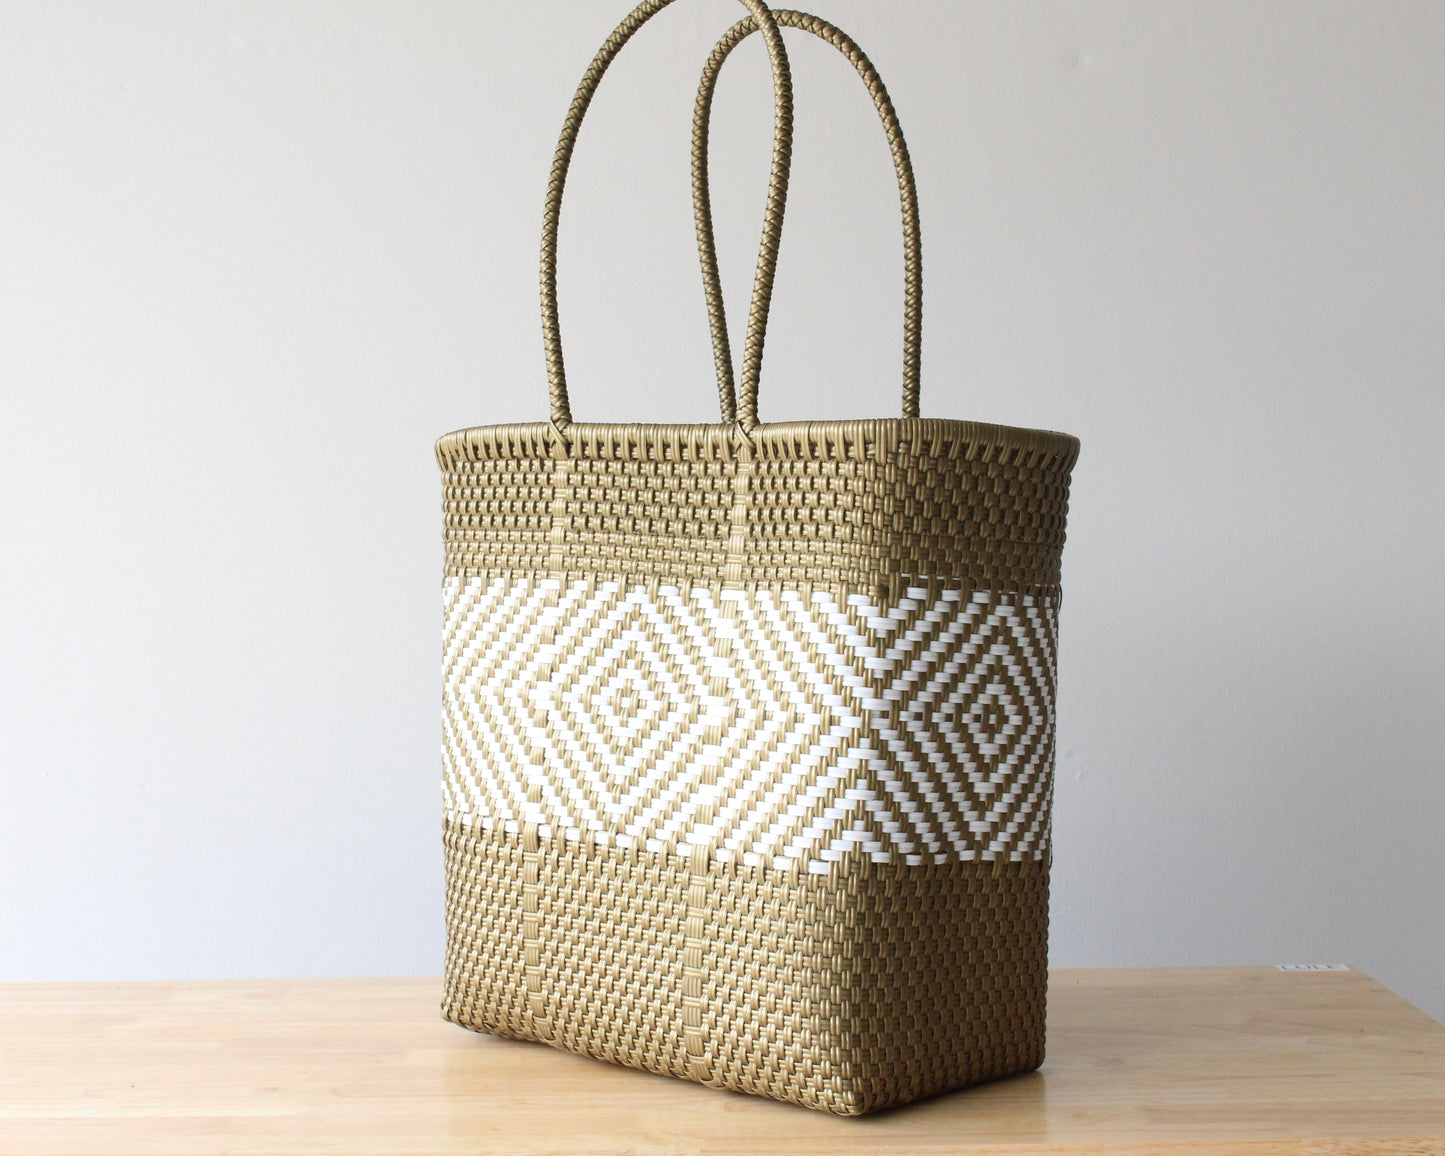 Gold & White Tote Bag by MexiMexi